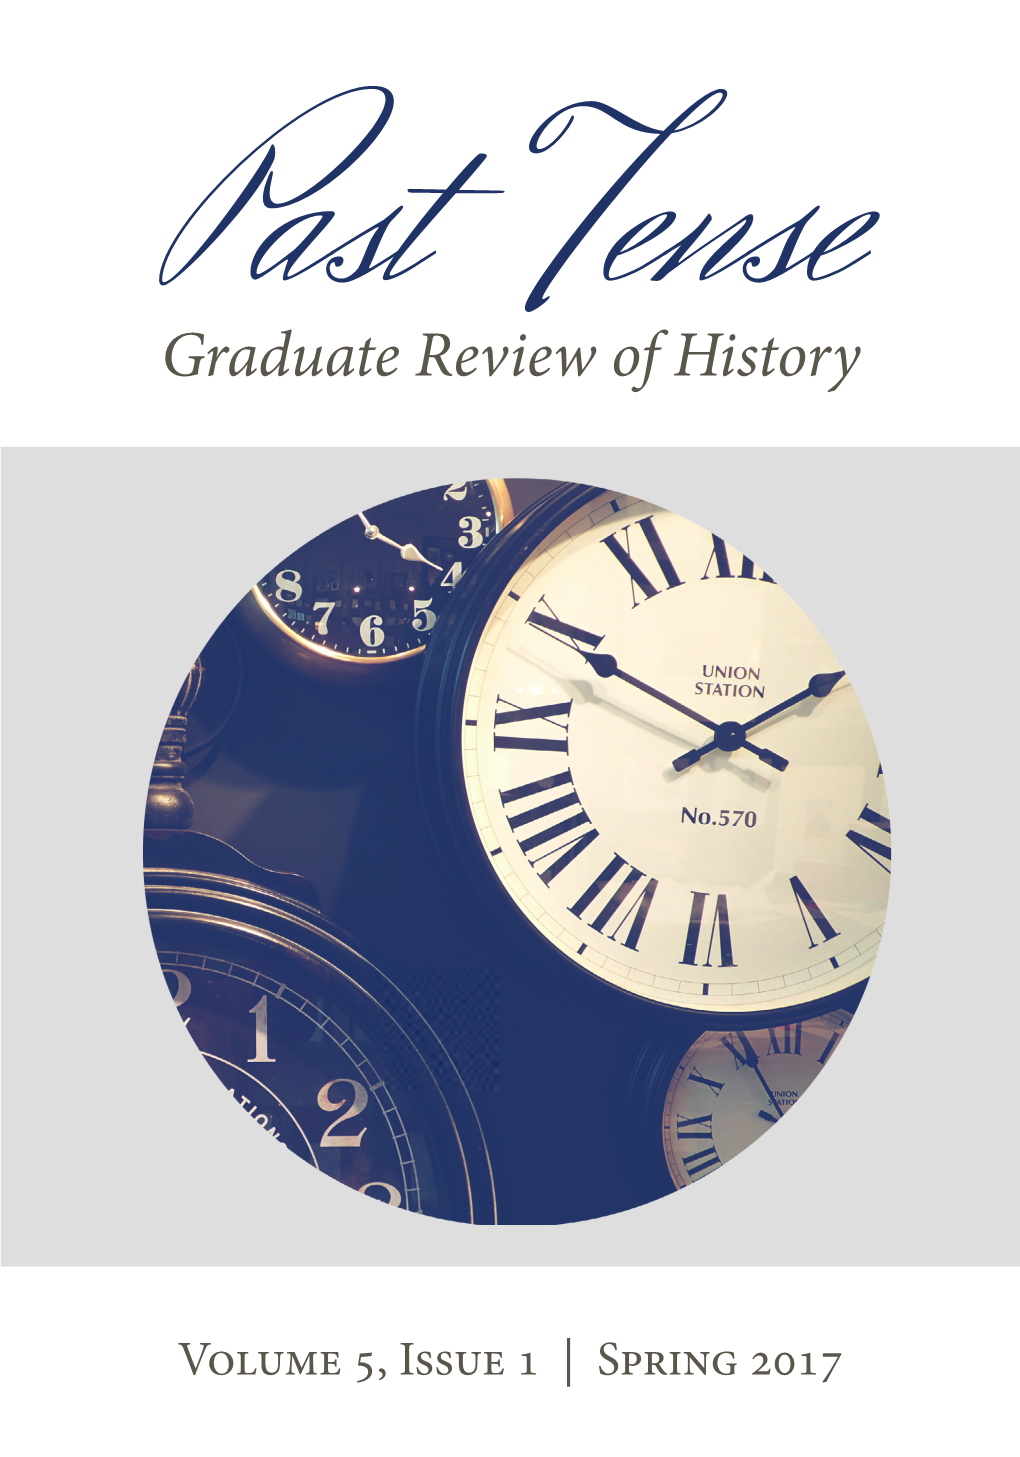 Graduate Review of History